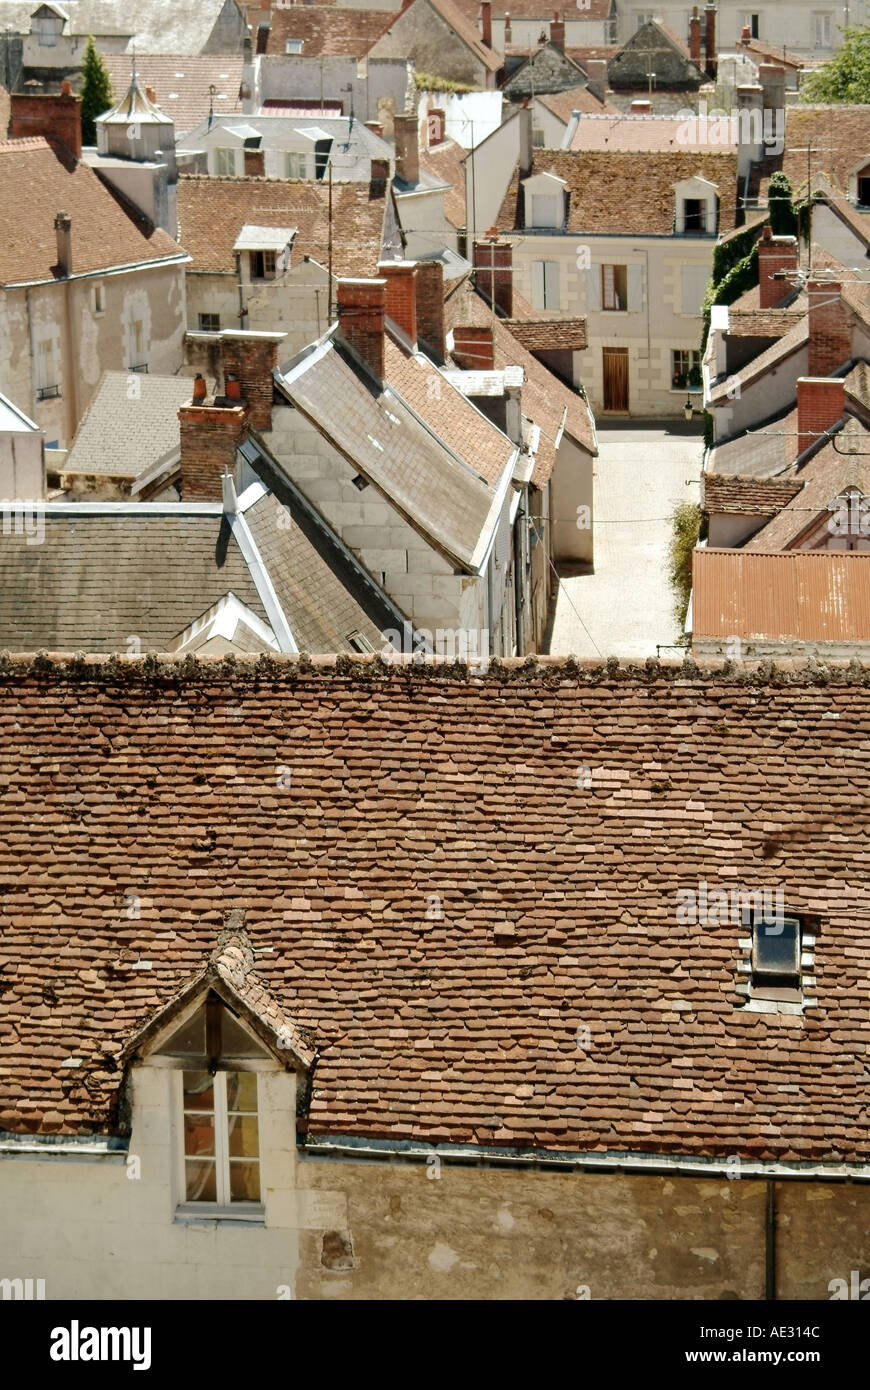 france loir et cher st aignan view of town from chateau Stock Photo